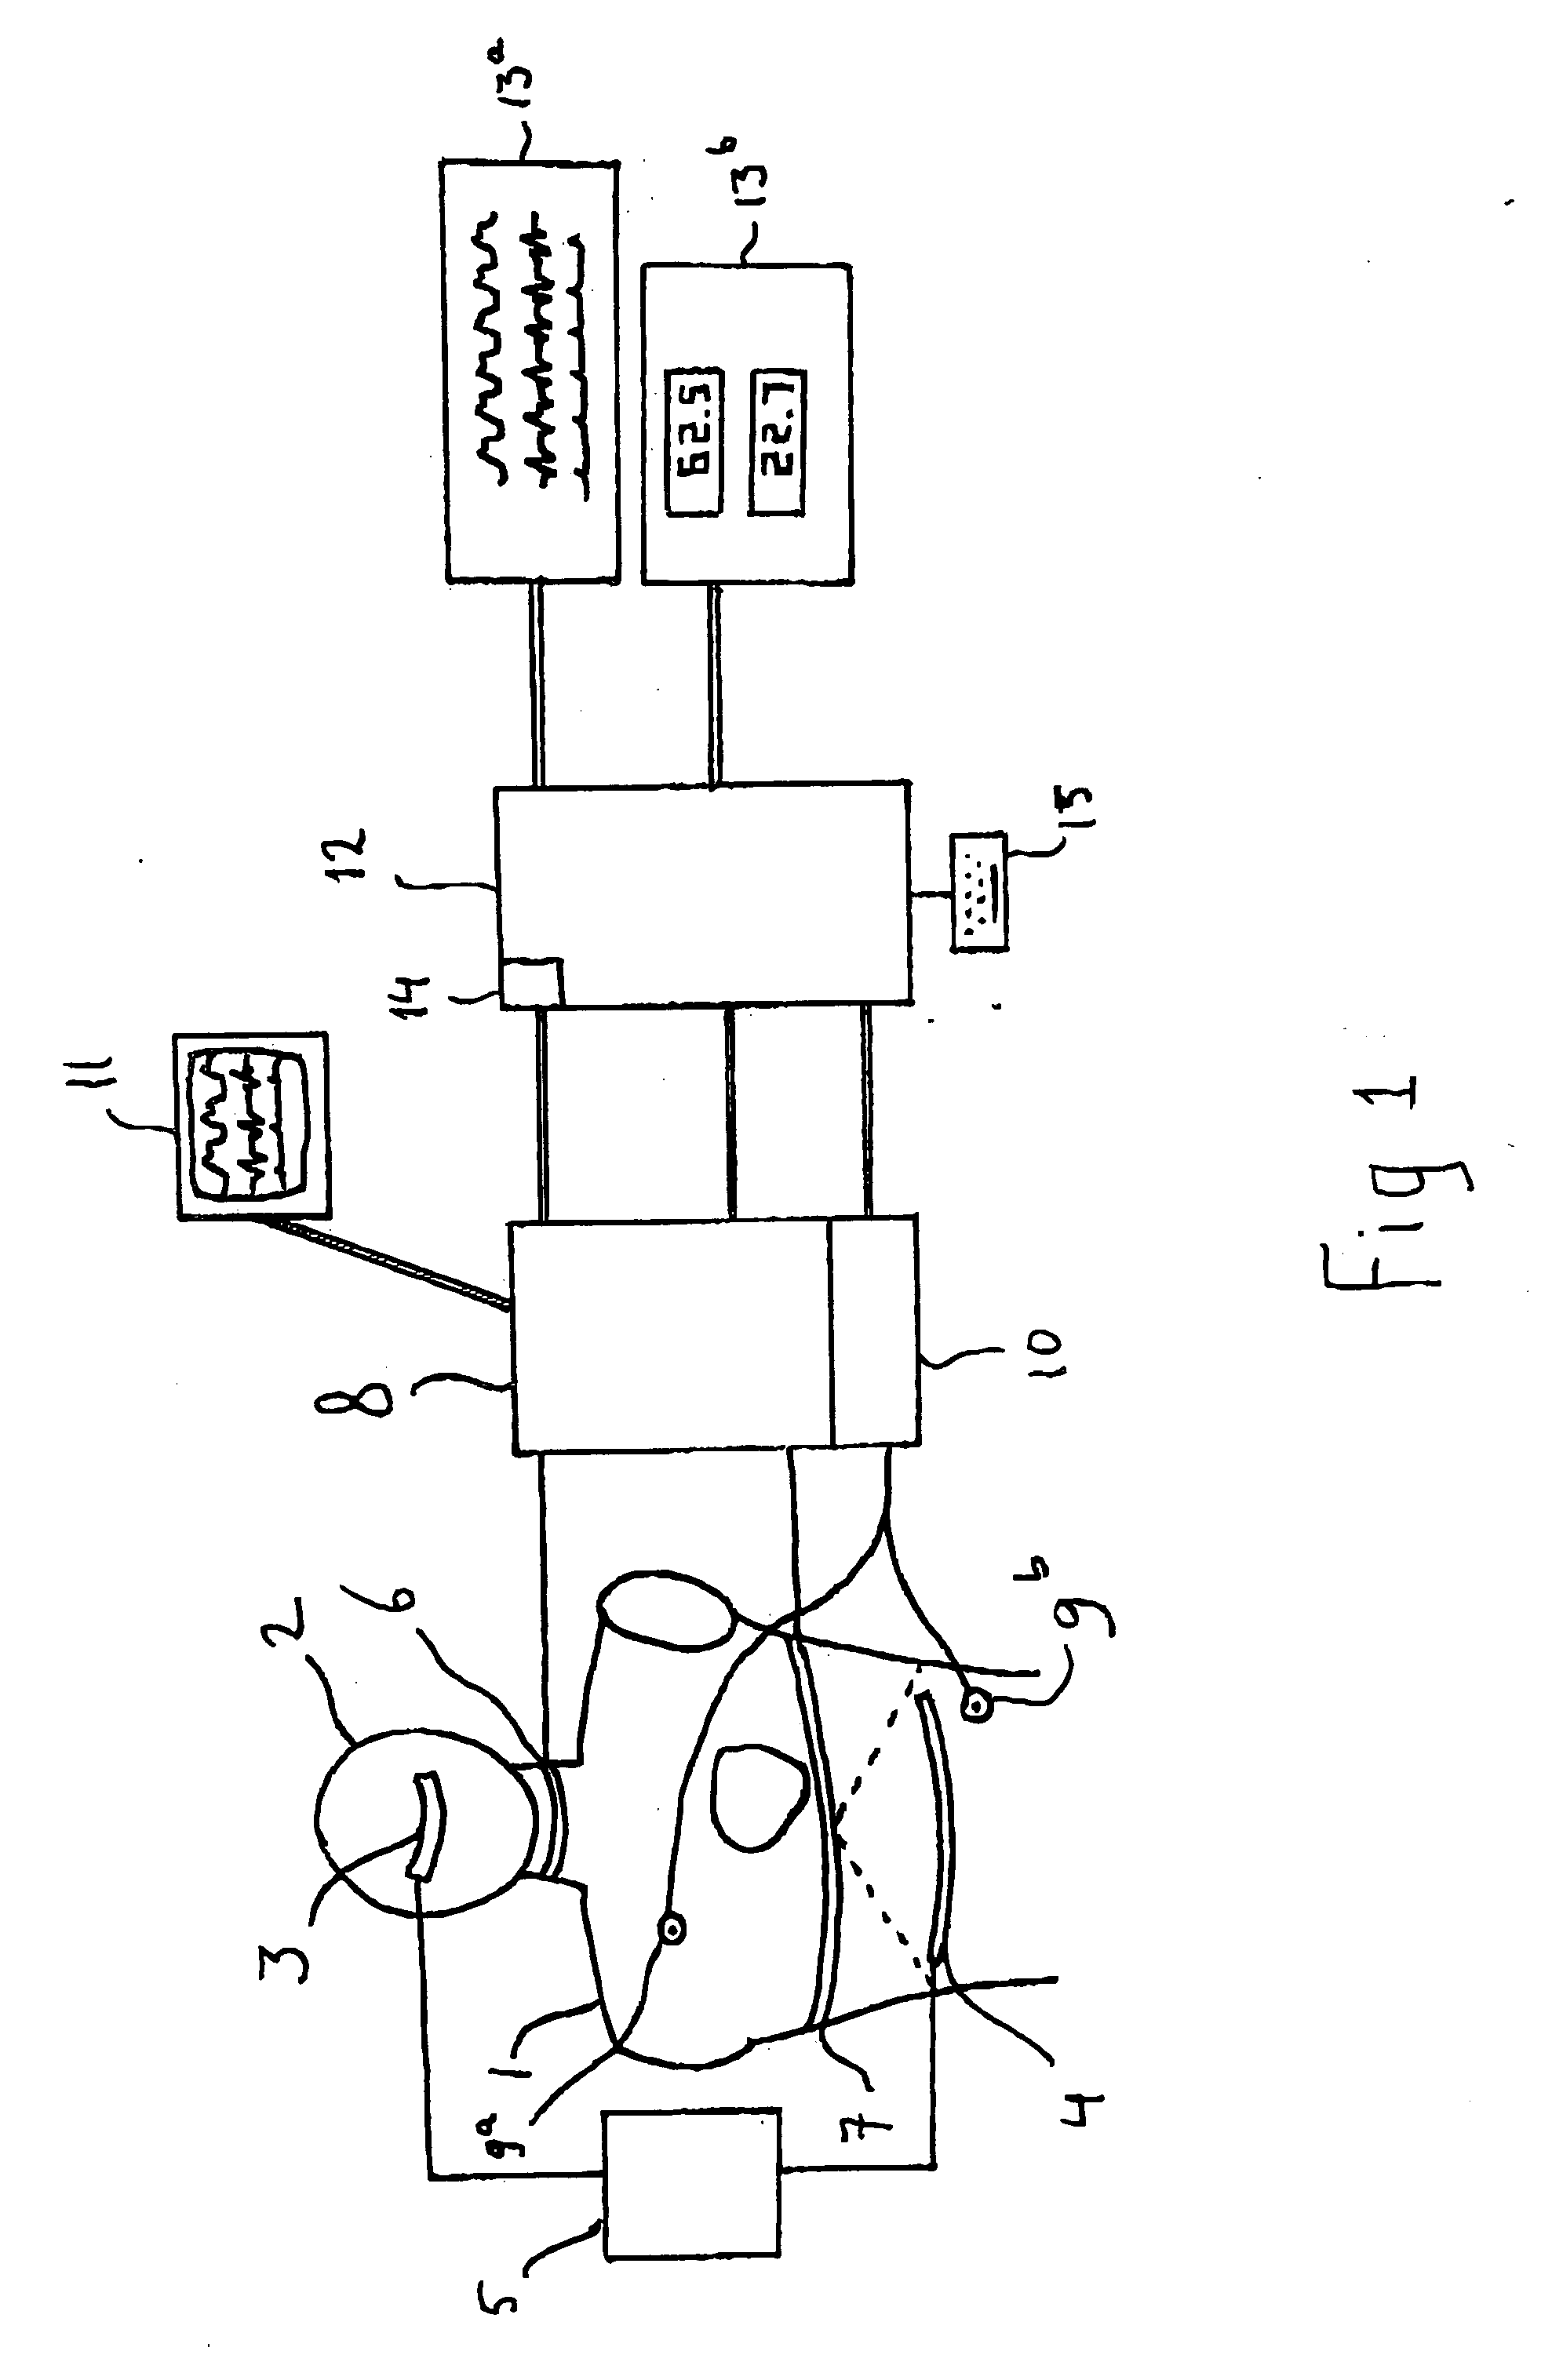 Device and method for determining coronary blood flow